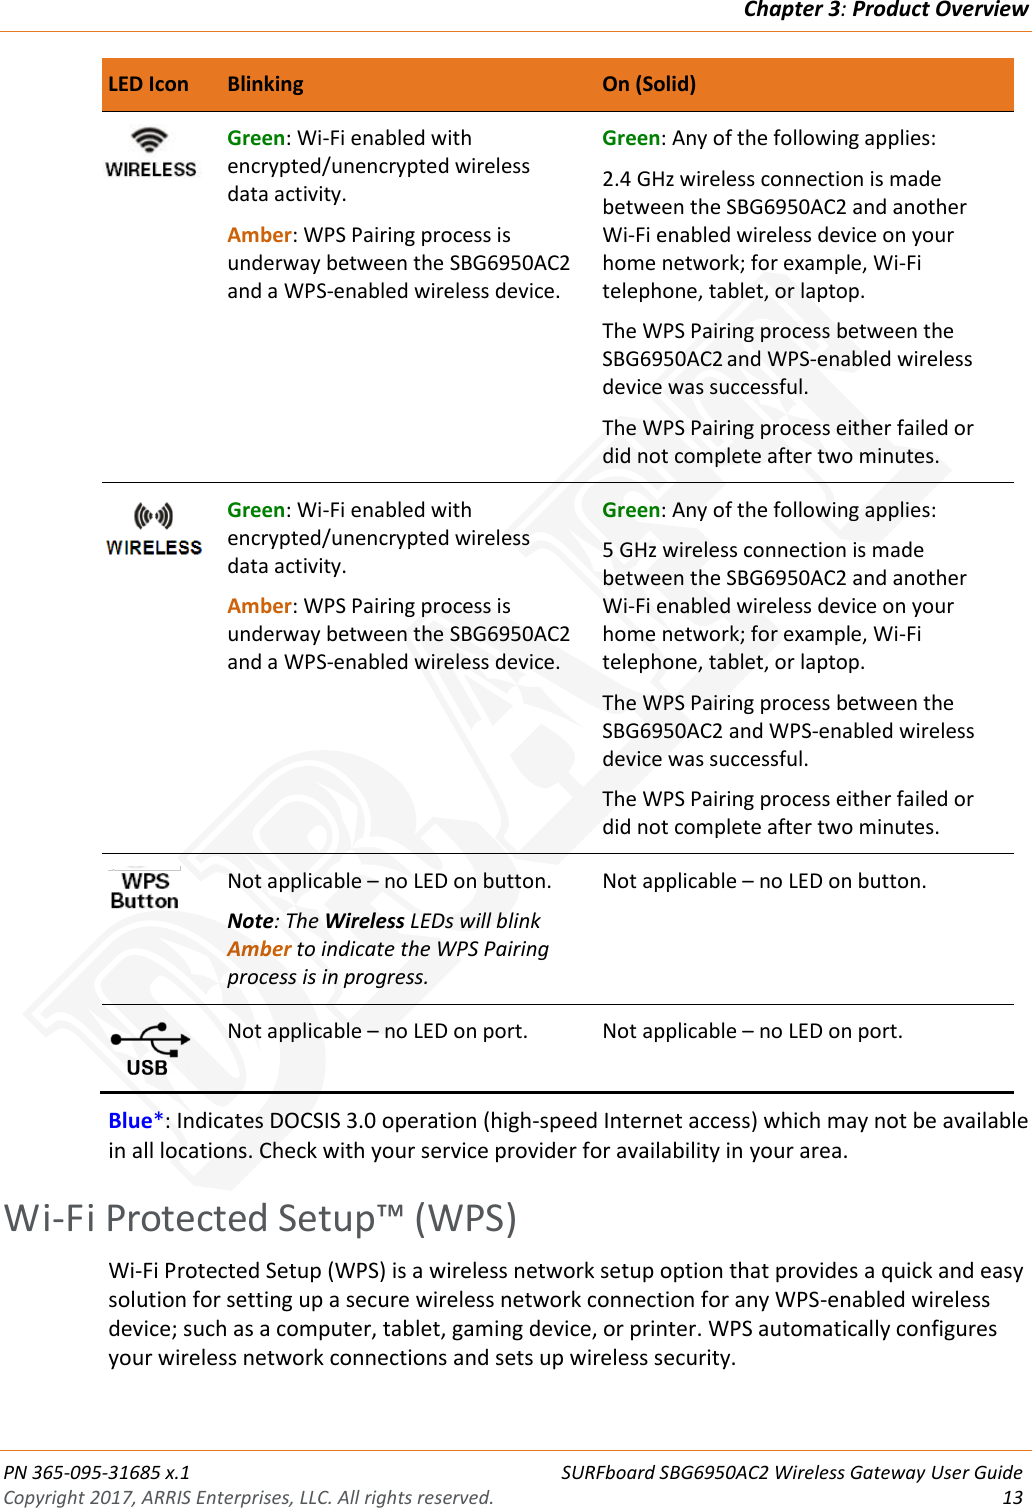 Chapter 3: Product Overview  PN 365-095-31685 x.1 SURFboard SBG6950AC2 Wireless Gateway User Guide Copyright 2017, ARRIS Enterprises, LLC. All rights reserved. 13   LED Icon Blinking On (Solid)  Green: Wi-Fi enabled with encrypted/unencrypted wireless  data activity. Amber: WPS Pairing process is underway between the SBG6950AC2 and a WPS-enabled wireless device. Green: Any of the following applies: 2.4 GHz wireless connection is made between the SBG6950AC2 and another Wi-Fi enabled wireless device on your home network; for example, Wi-Fi telephone, tablet, or laptop. The WPS Pairing process between the SBG6950AC2 and WPS-enabled wireless device was successful. The WPS Pairing process either failed or did not complete after two minutes.  Green: Wi-Fi enabled with encrypted/unencrypted wireless  data activity. Amber: WPS Pairing process is underway between the SBG6950AC2 and a WPS-enabled wireless device. Green: Any of the following applies: 5 GHz wireless connection is made between the SBG6950AC2 and another Wi-Fi enabled wireless device on your home network; for example, Wi-Fi telephone, tablet, or laptop. The WPS Pairing process between the SBG6950AC2 and WPS-enabled wireless device was successful. The WPS Pairing process either failed or did not complete after two minutes.    Not applicable – no LED on button. Note: The Wireless LEDs will blink Amber to indicate the WPS Pairing process is in progress. Not applicable – no LED on button.    Not applicable – no LED on port. Not applicable – no LED on port. Blue*: Indicates DOCSIS 3.0 operation (high-speed Internet access) which may not be available in all locations. Check with your service provider for availability in your area.   Wi-Fi Protected Setup™ (WPS) Wi-Fi Protected Setup (WPS) is a wireless network setup option that provides a quick and easy solution for setting up a secure wireless network connection for any WPS-enabled wireless device; such as a computer, tablet, gaming device, or printer. WPS automatically configures your wireless network connections and sets up wireless security.    DRAFT